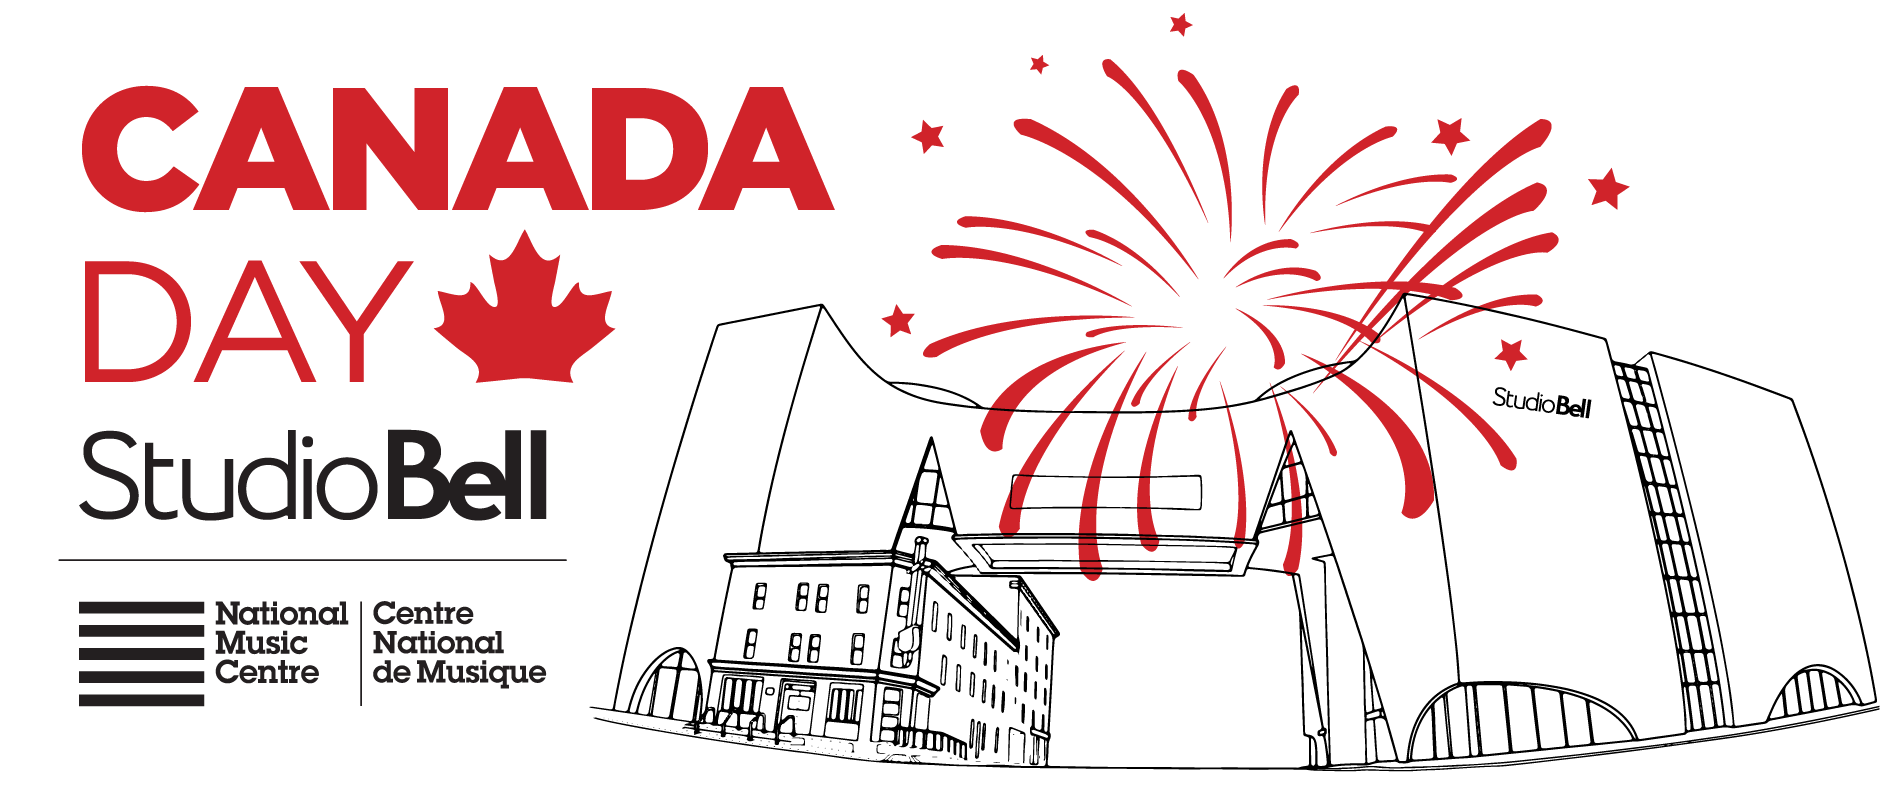 Canada Day at Studio Bell Tickets